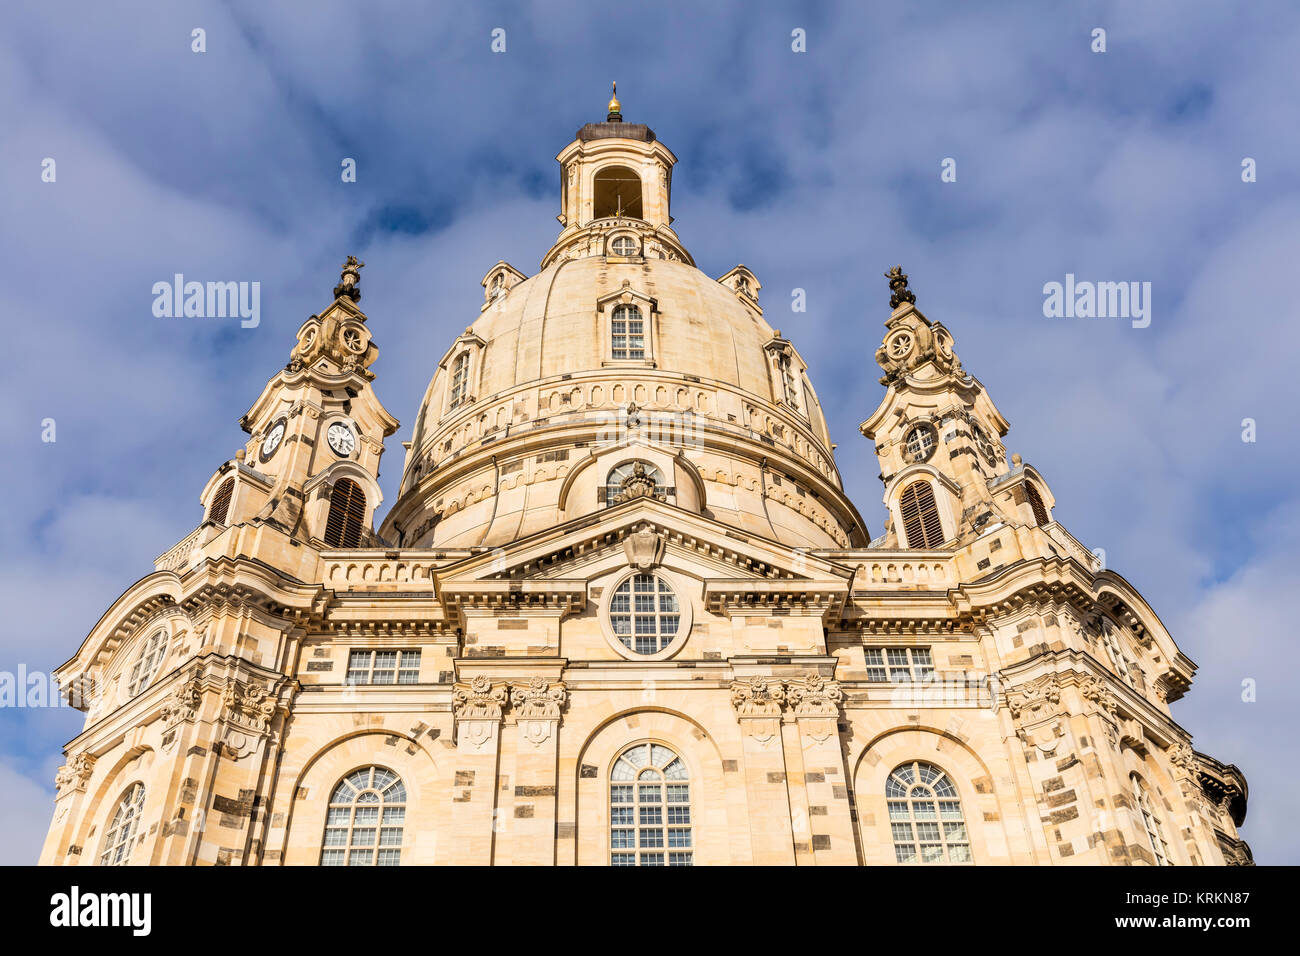 dome of the frauenkirche Stock Photo